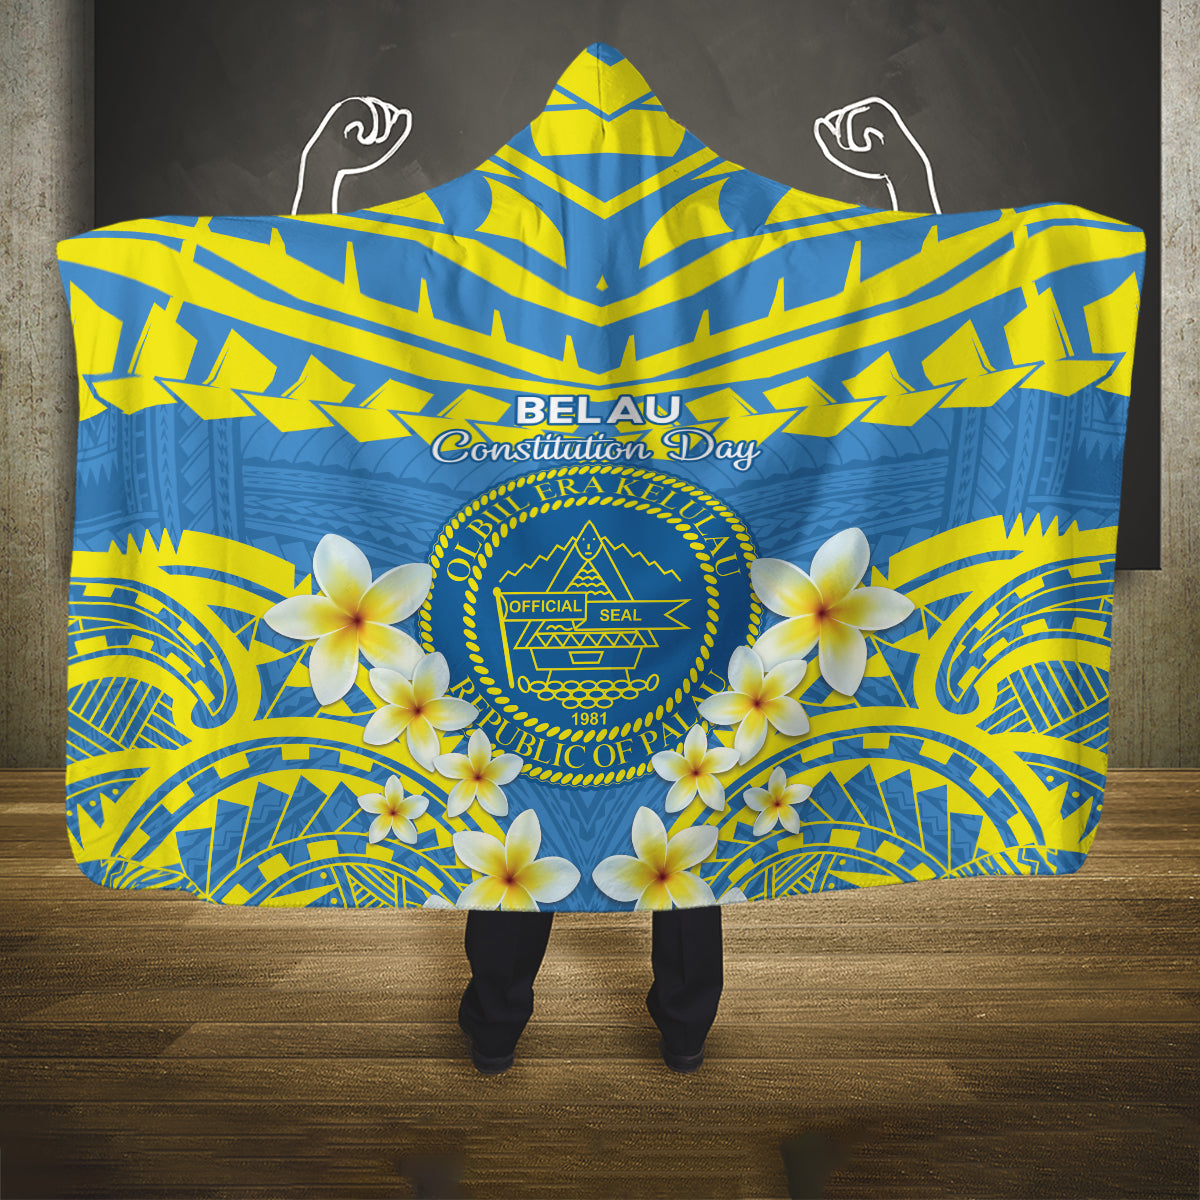 Palau Constitution Day Hooded Blanket Belau Seal With Frangipani Polynesian Pattern - Blue